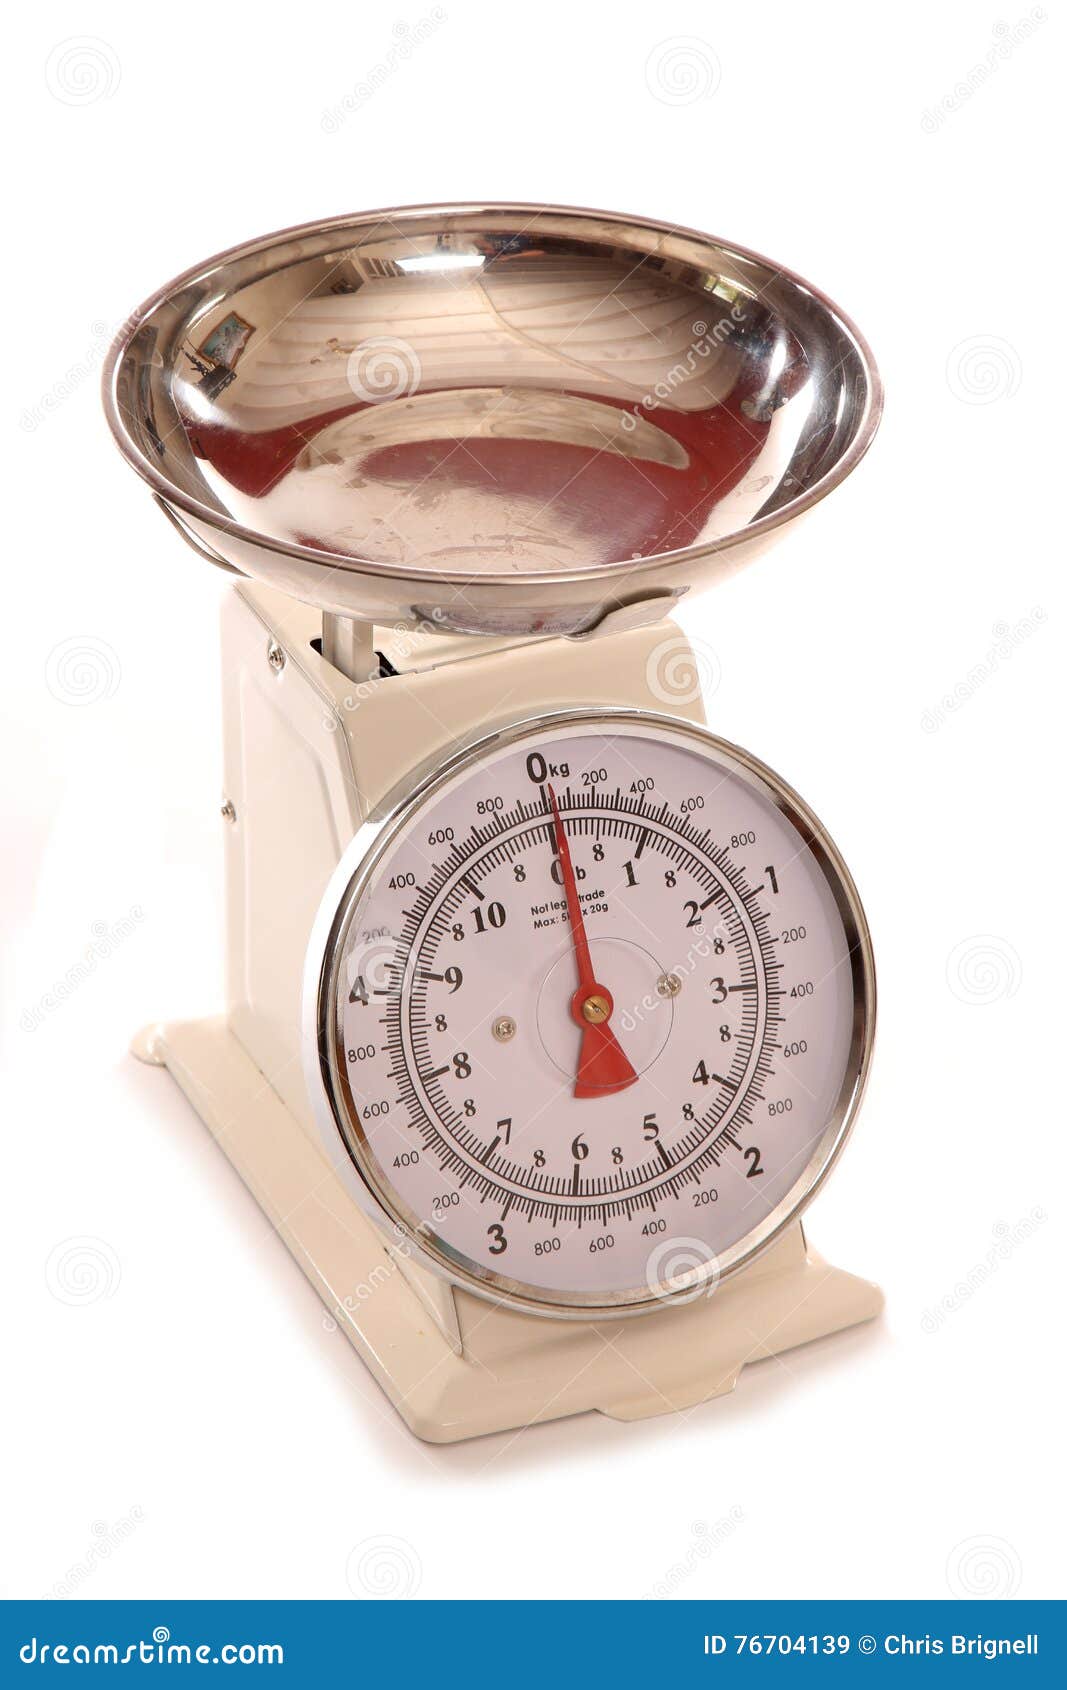 https://thumbs.dreamstime.com/z/cream-vintage-style-cooking-scales-cutout-76704139.jpg